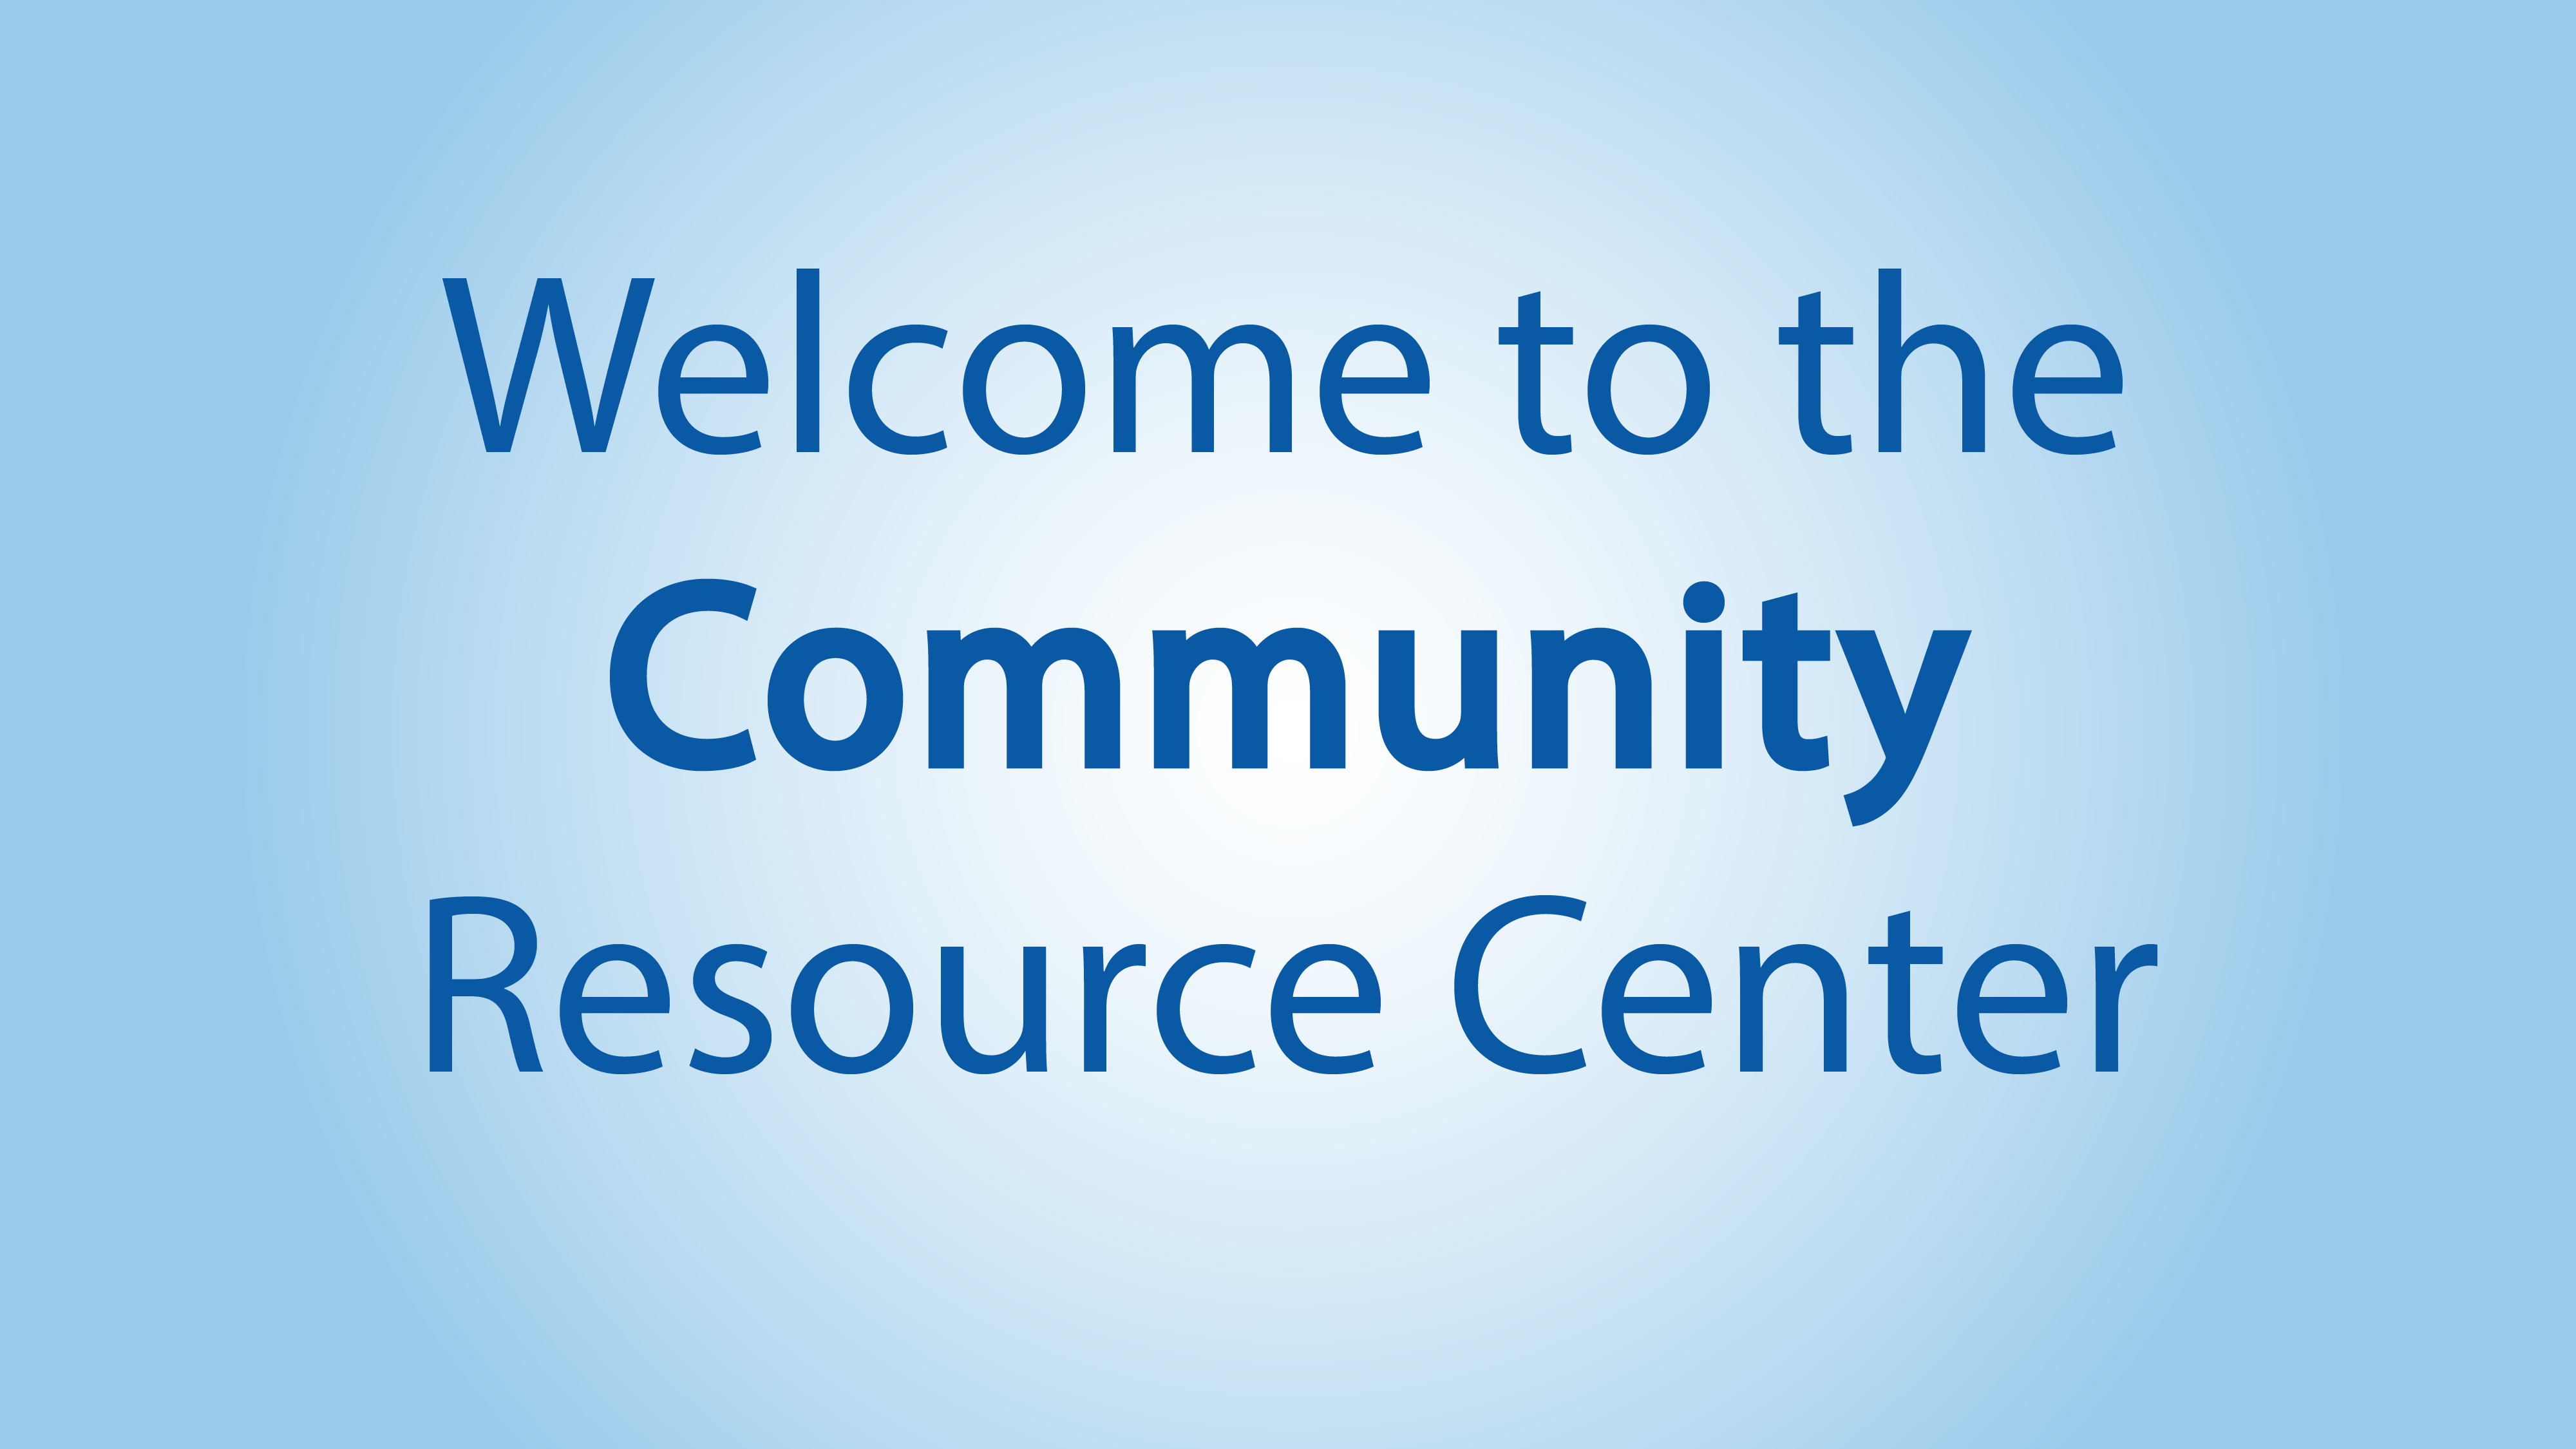 Community Resource Center Welcome